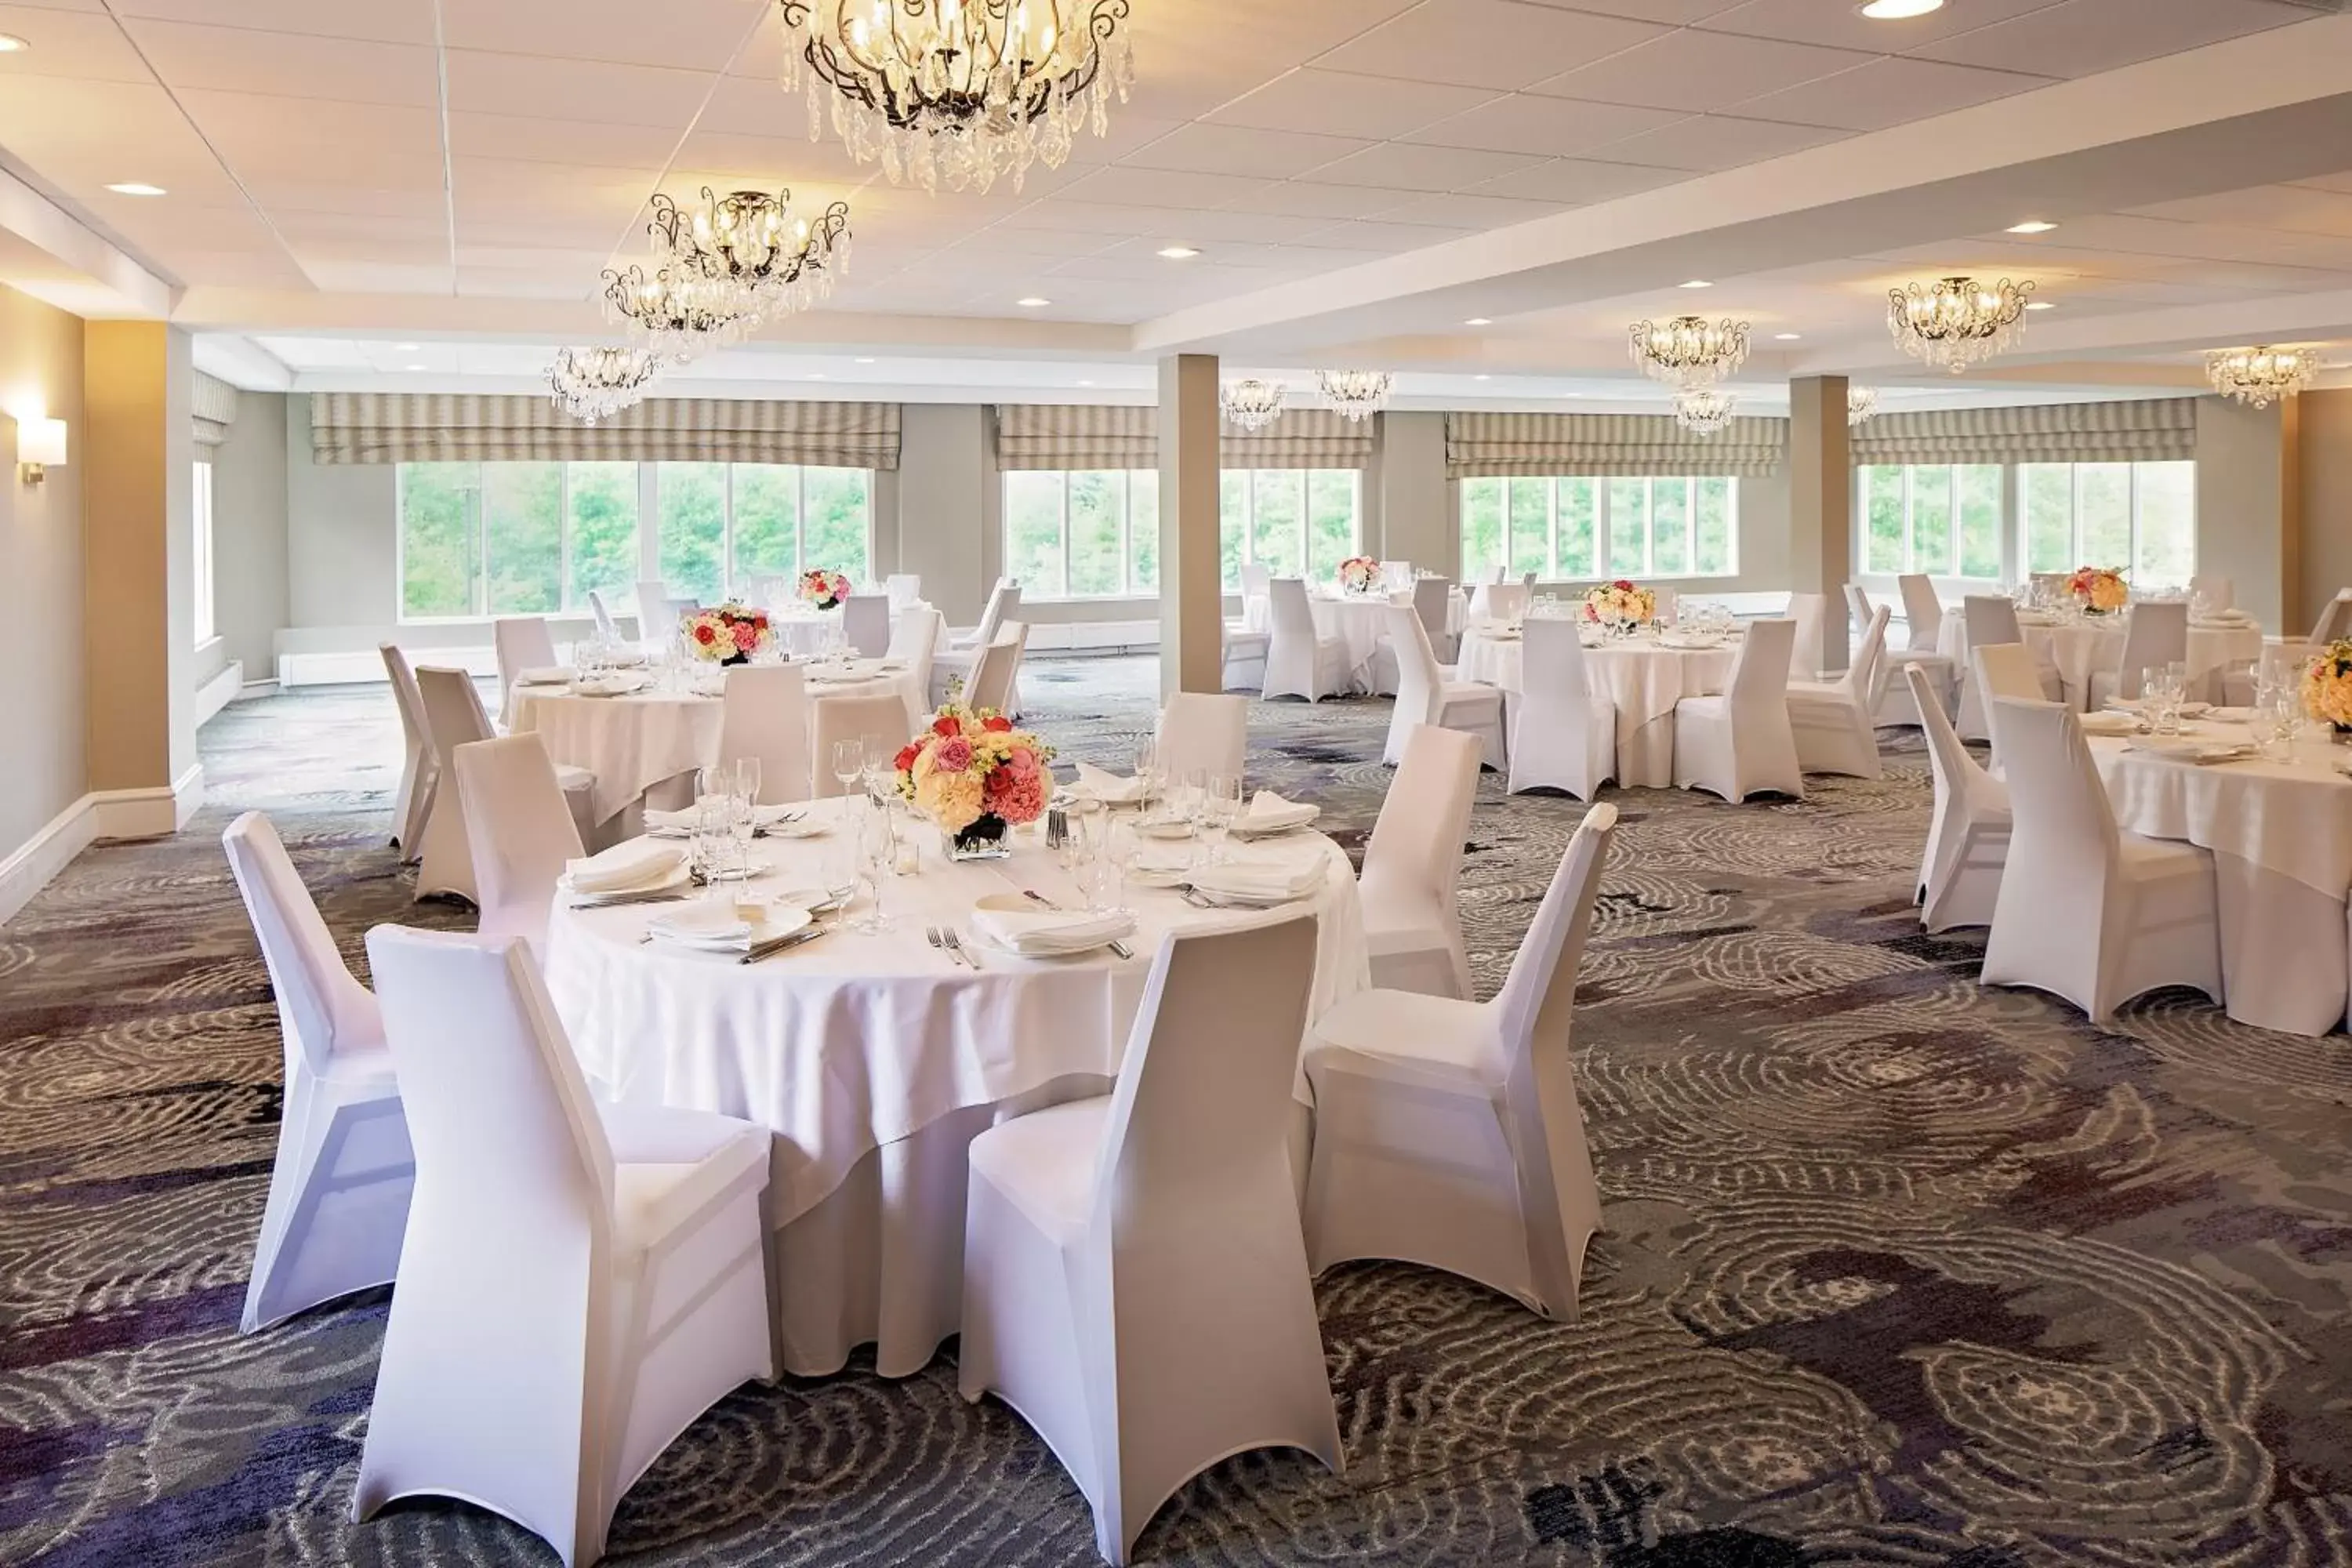 Meeting/conference room, Banquet Facilities in The Westin Governor Morris, Morristown